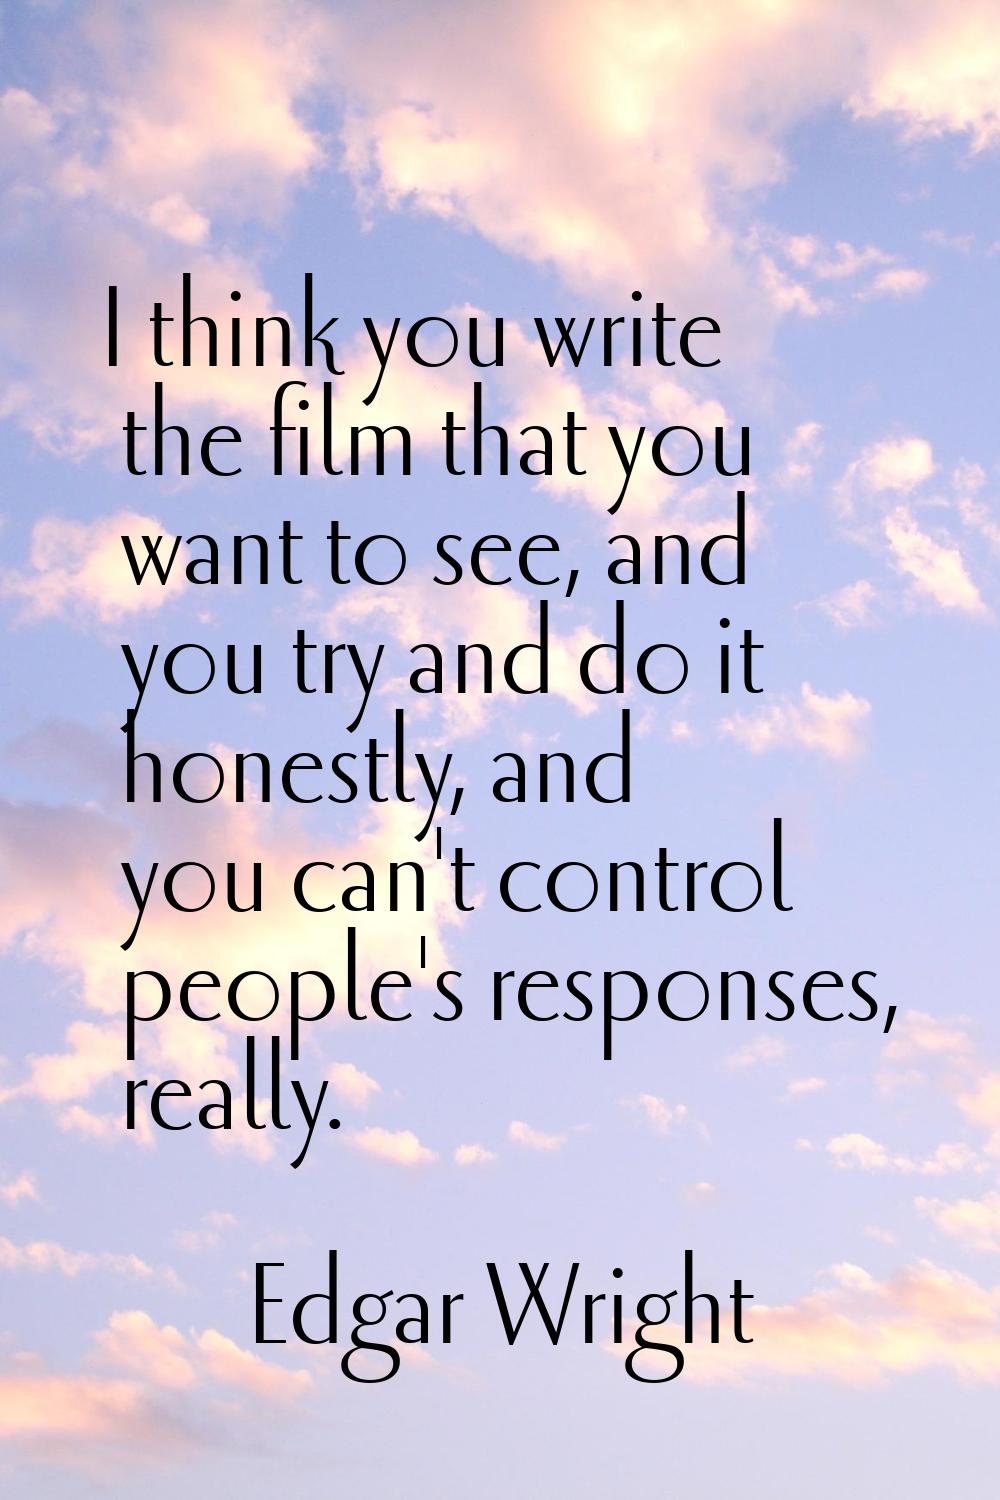 I think you write the film that you want to see, and you try and do it honestly, and you can't cont